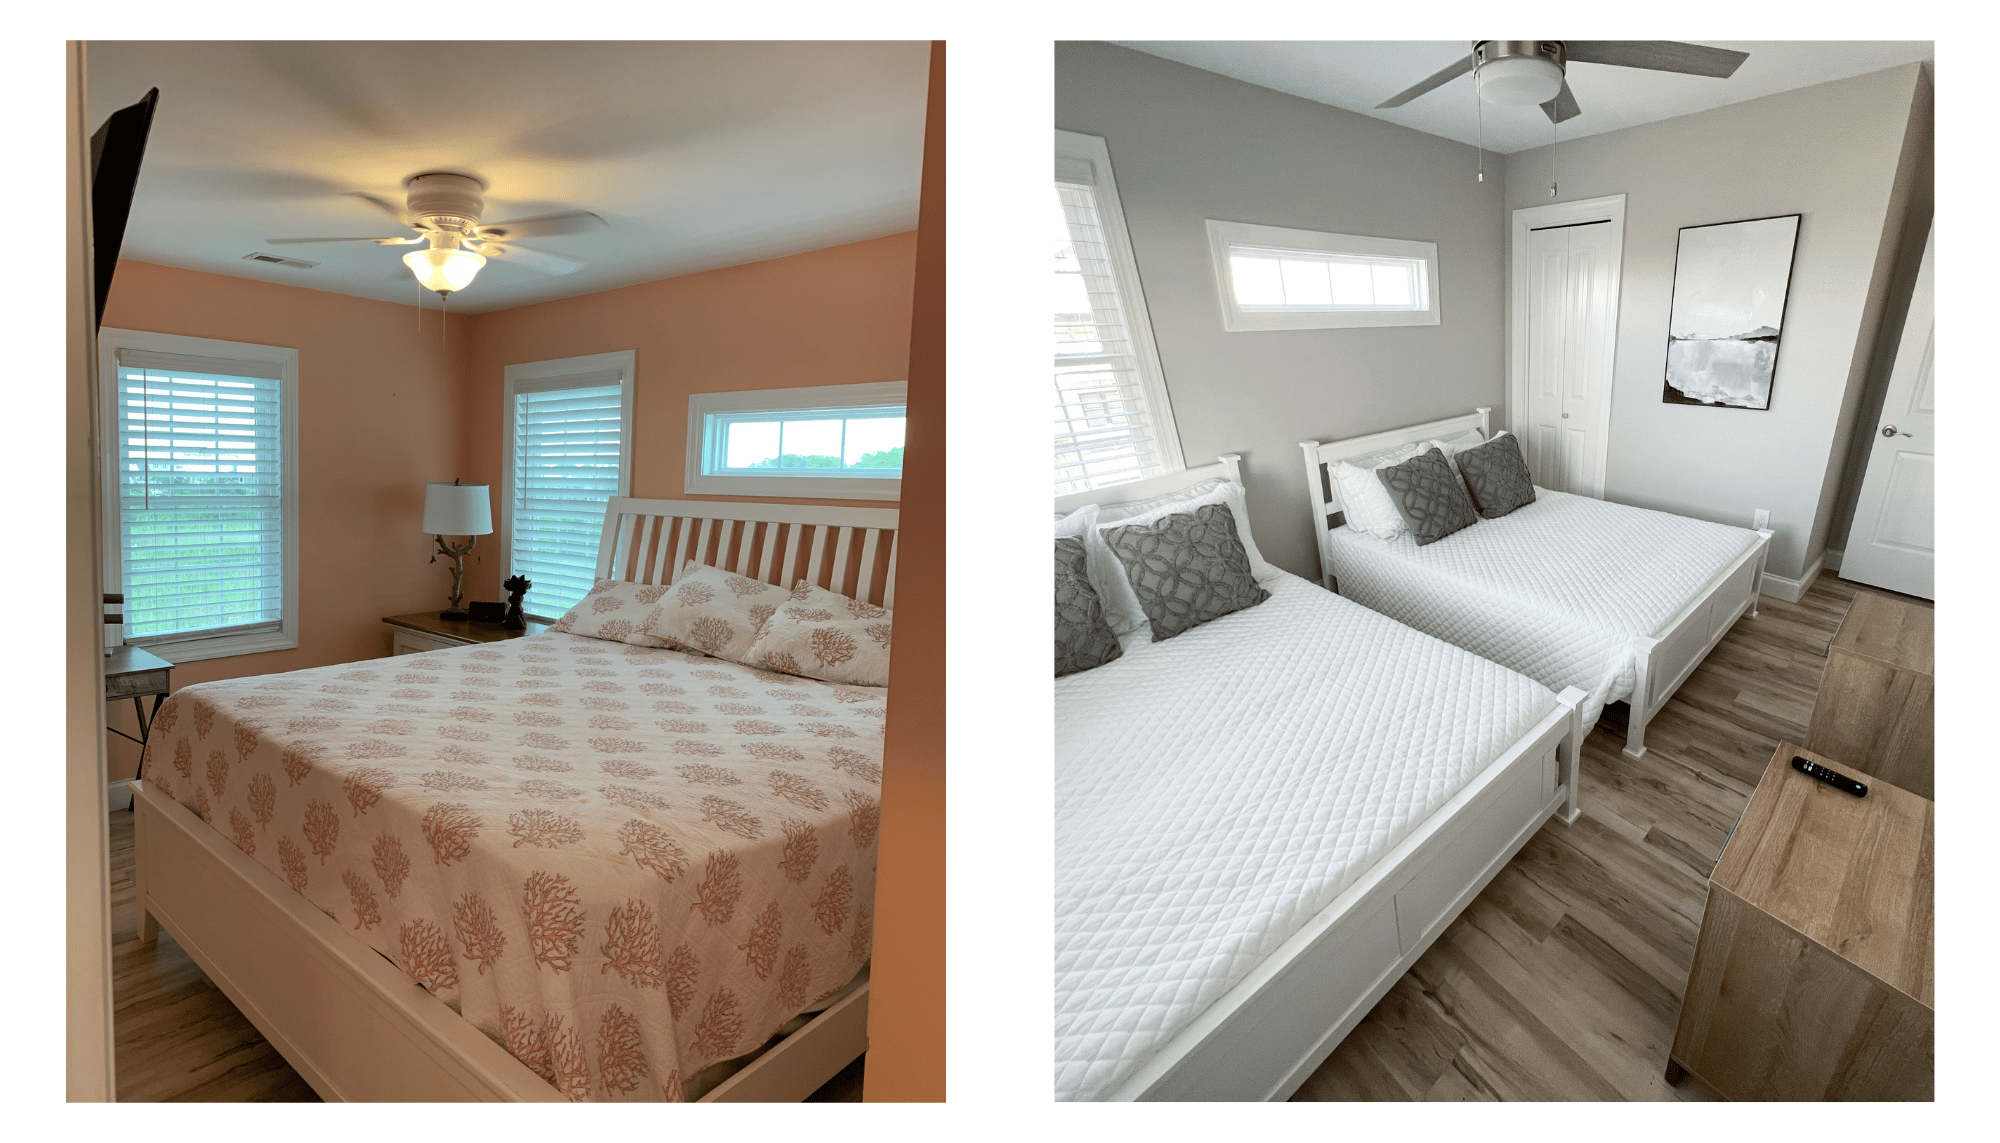 Bedroom remodel, Anchors Awey Ocean Isle Beach Before and After, Beach House flip, Ocean isle beach, NC vacation rental, Stilettos and Diapers